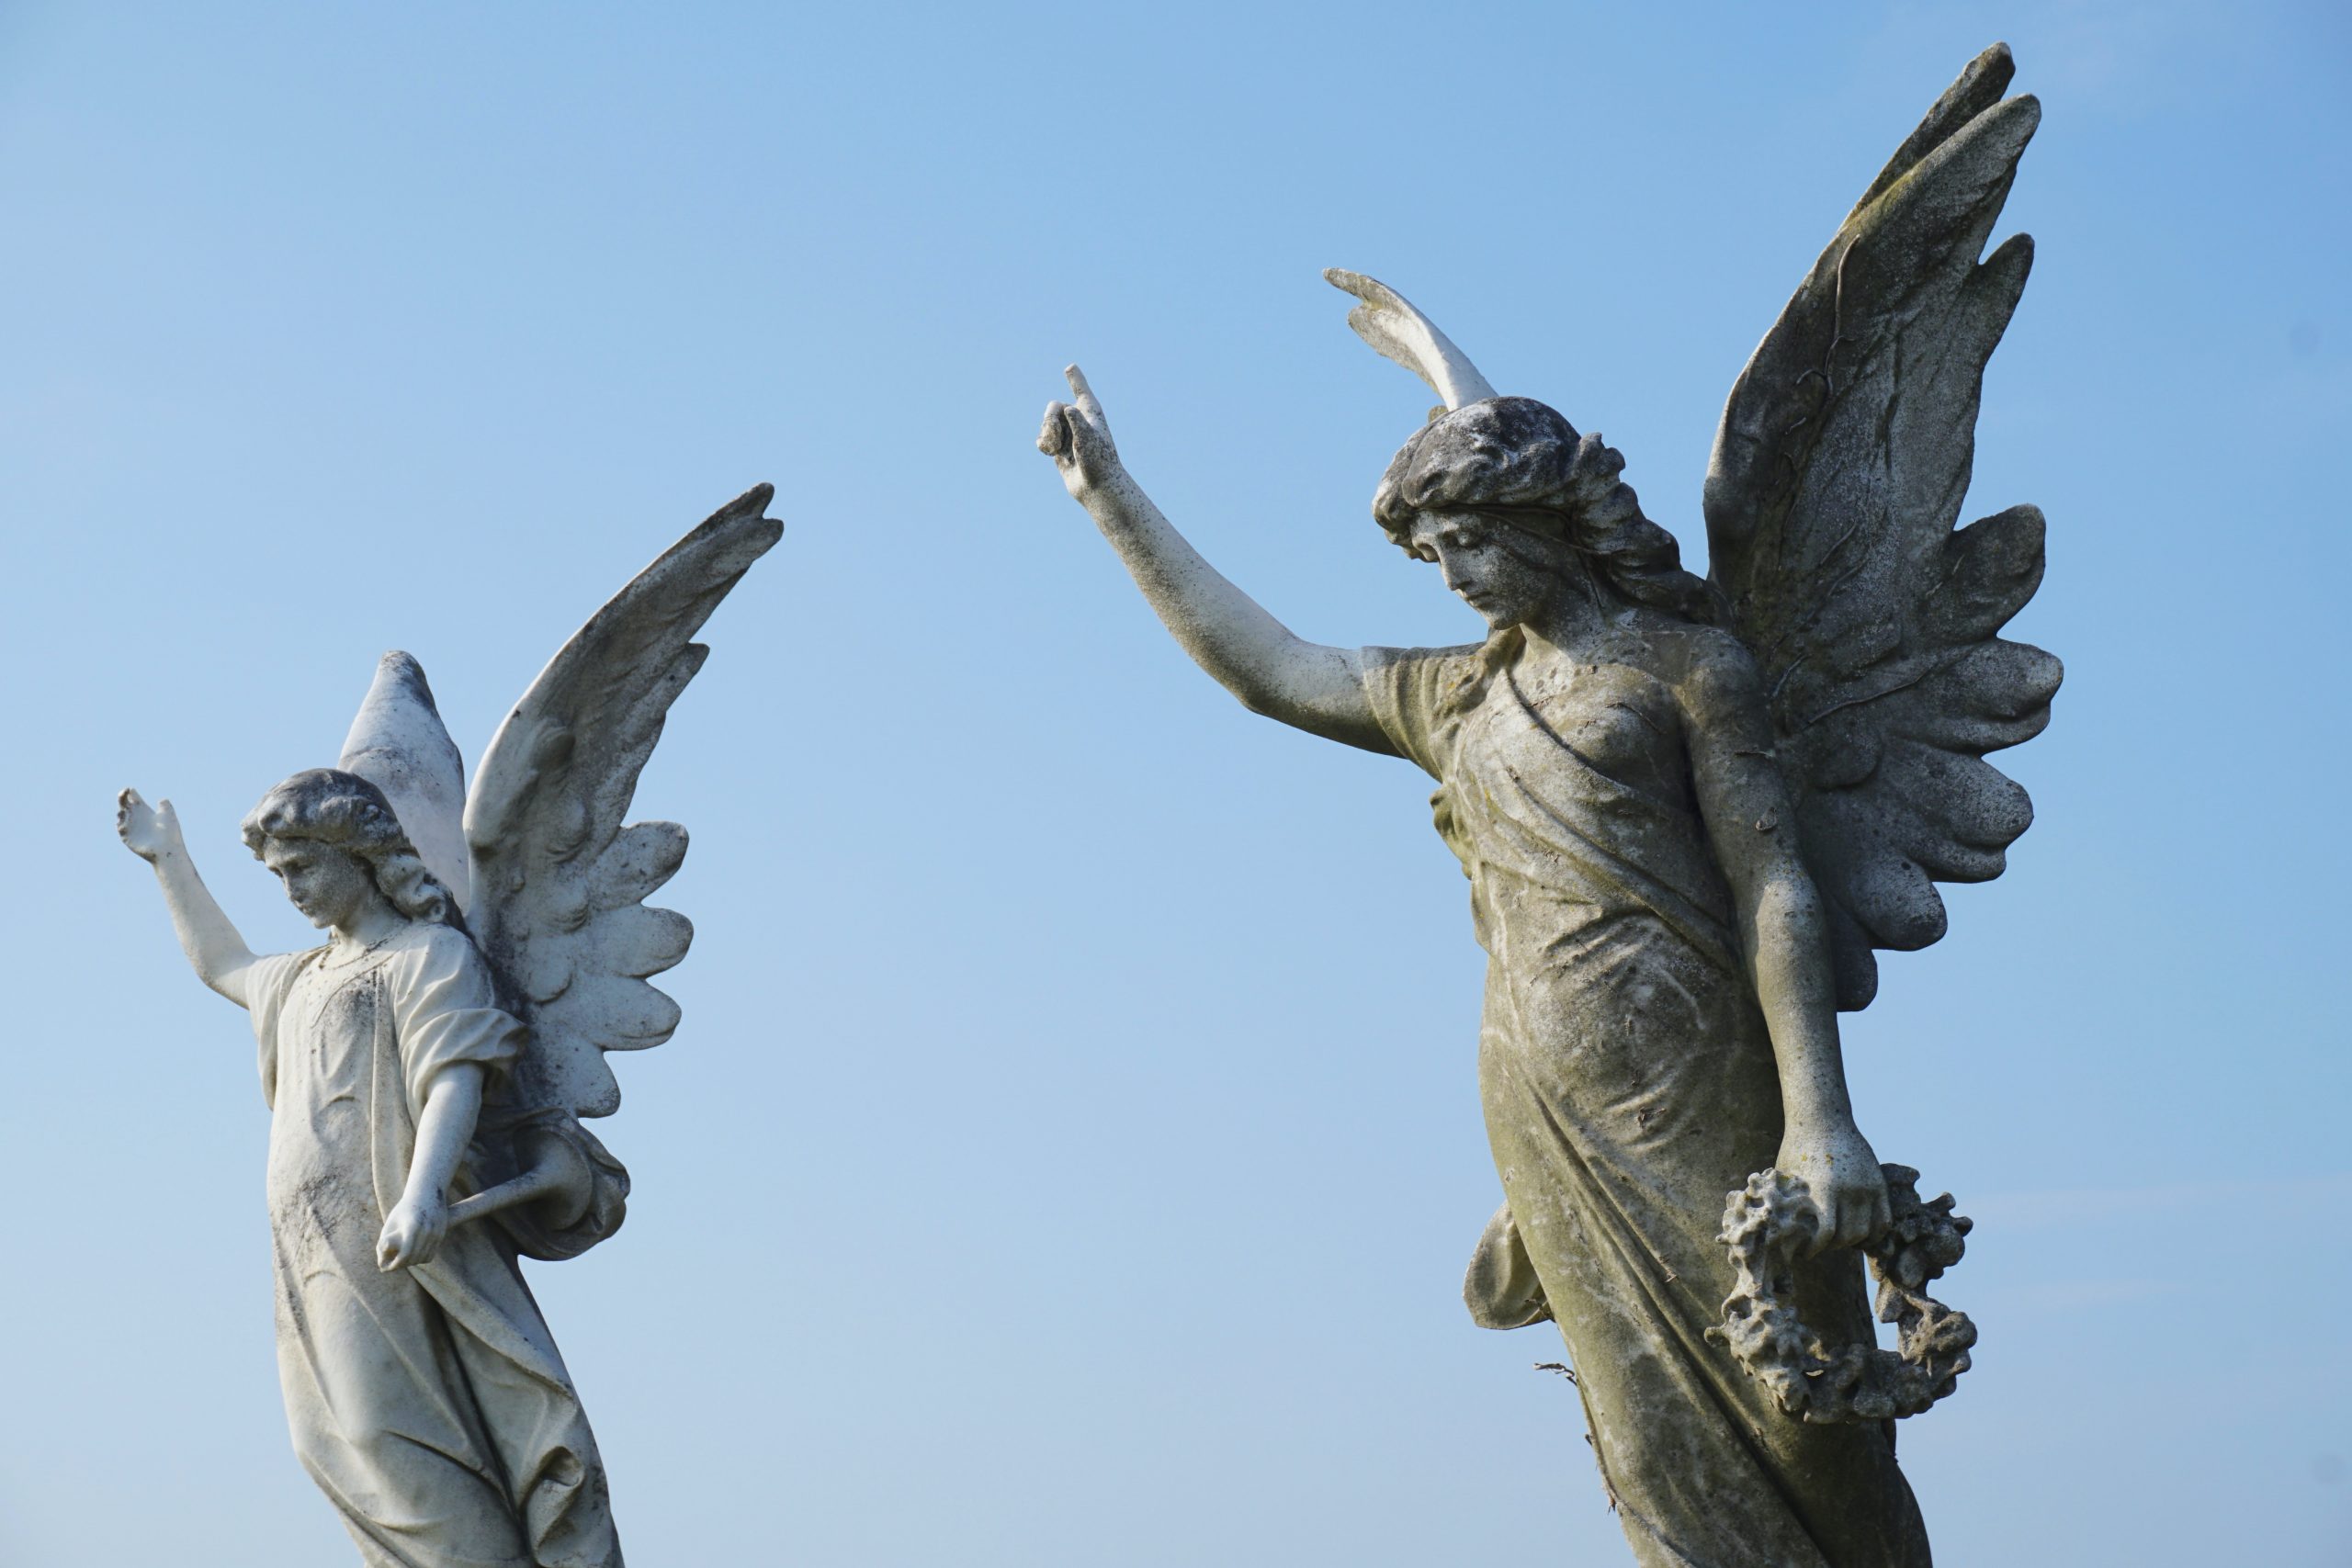 Which Angels, Guides and Loved ones Are With You?